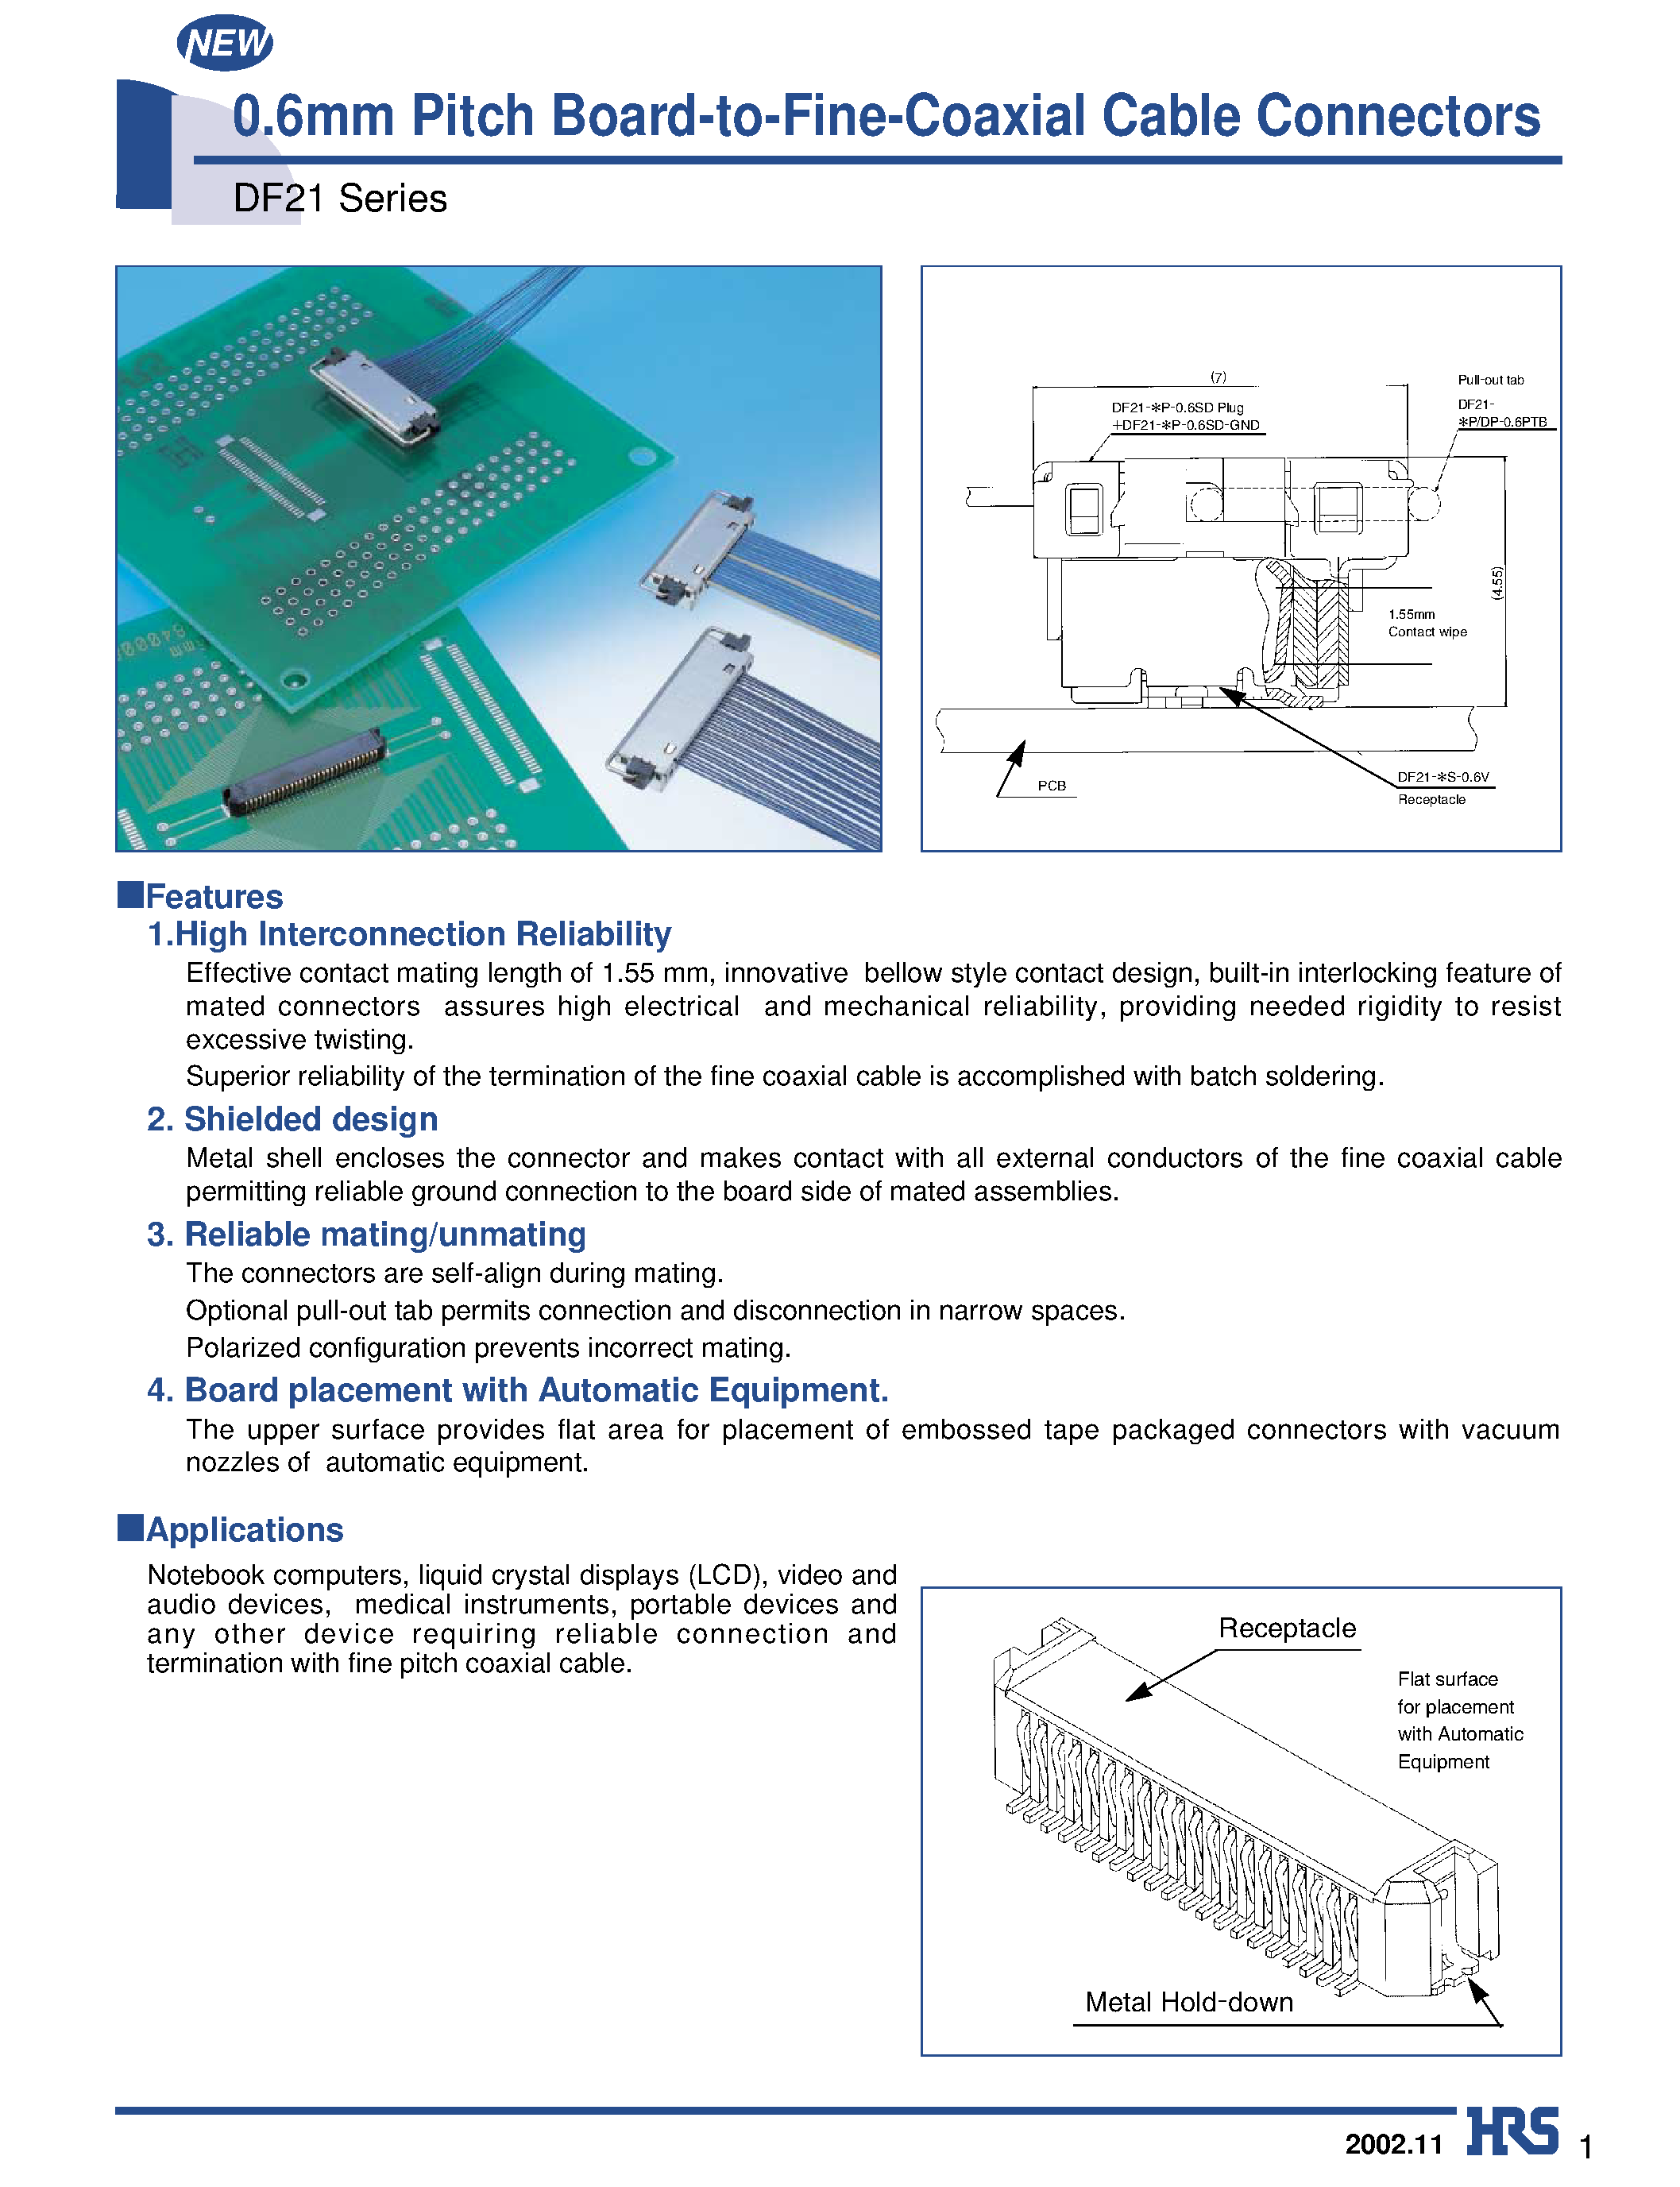 Datasheet DF21-30P-0.6SD-GND - 0.6mm Pitch Board-to-Fine-Coaxial Cable Connectors page 1